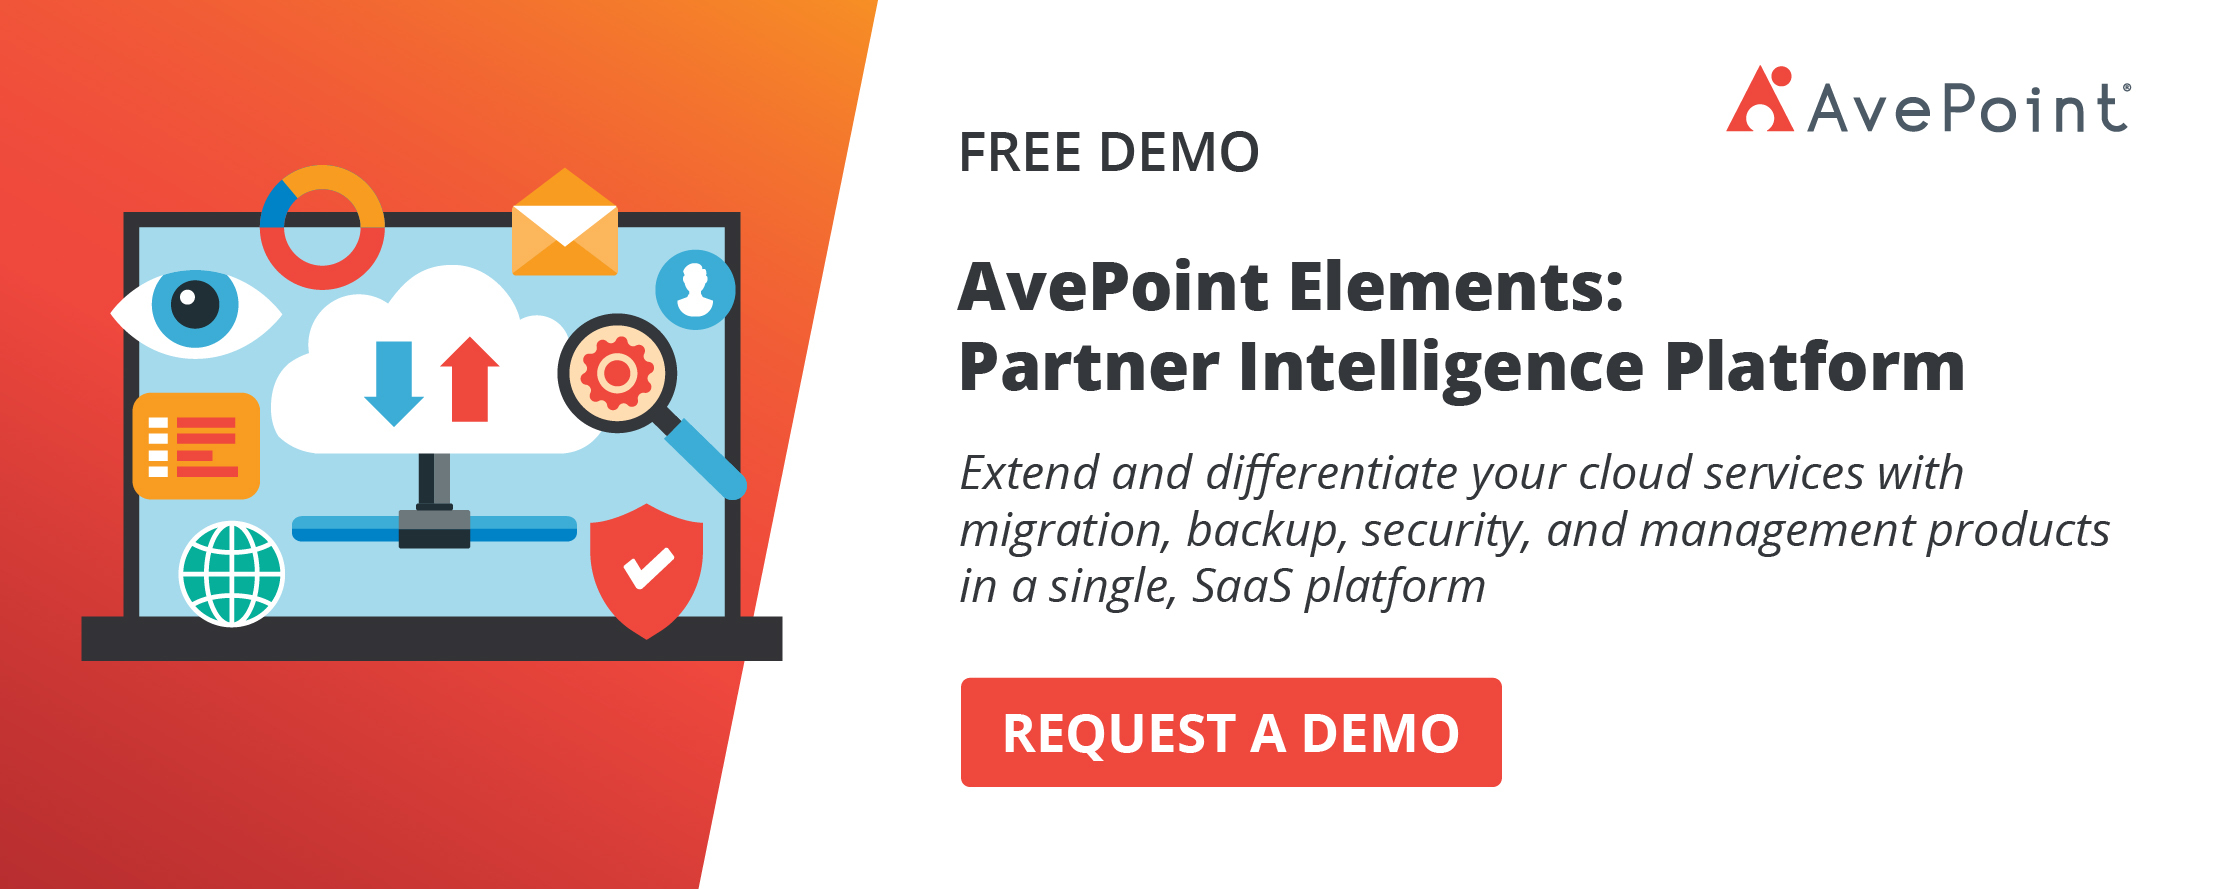 AvePoint Elements Request Demo